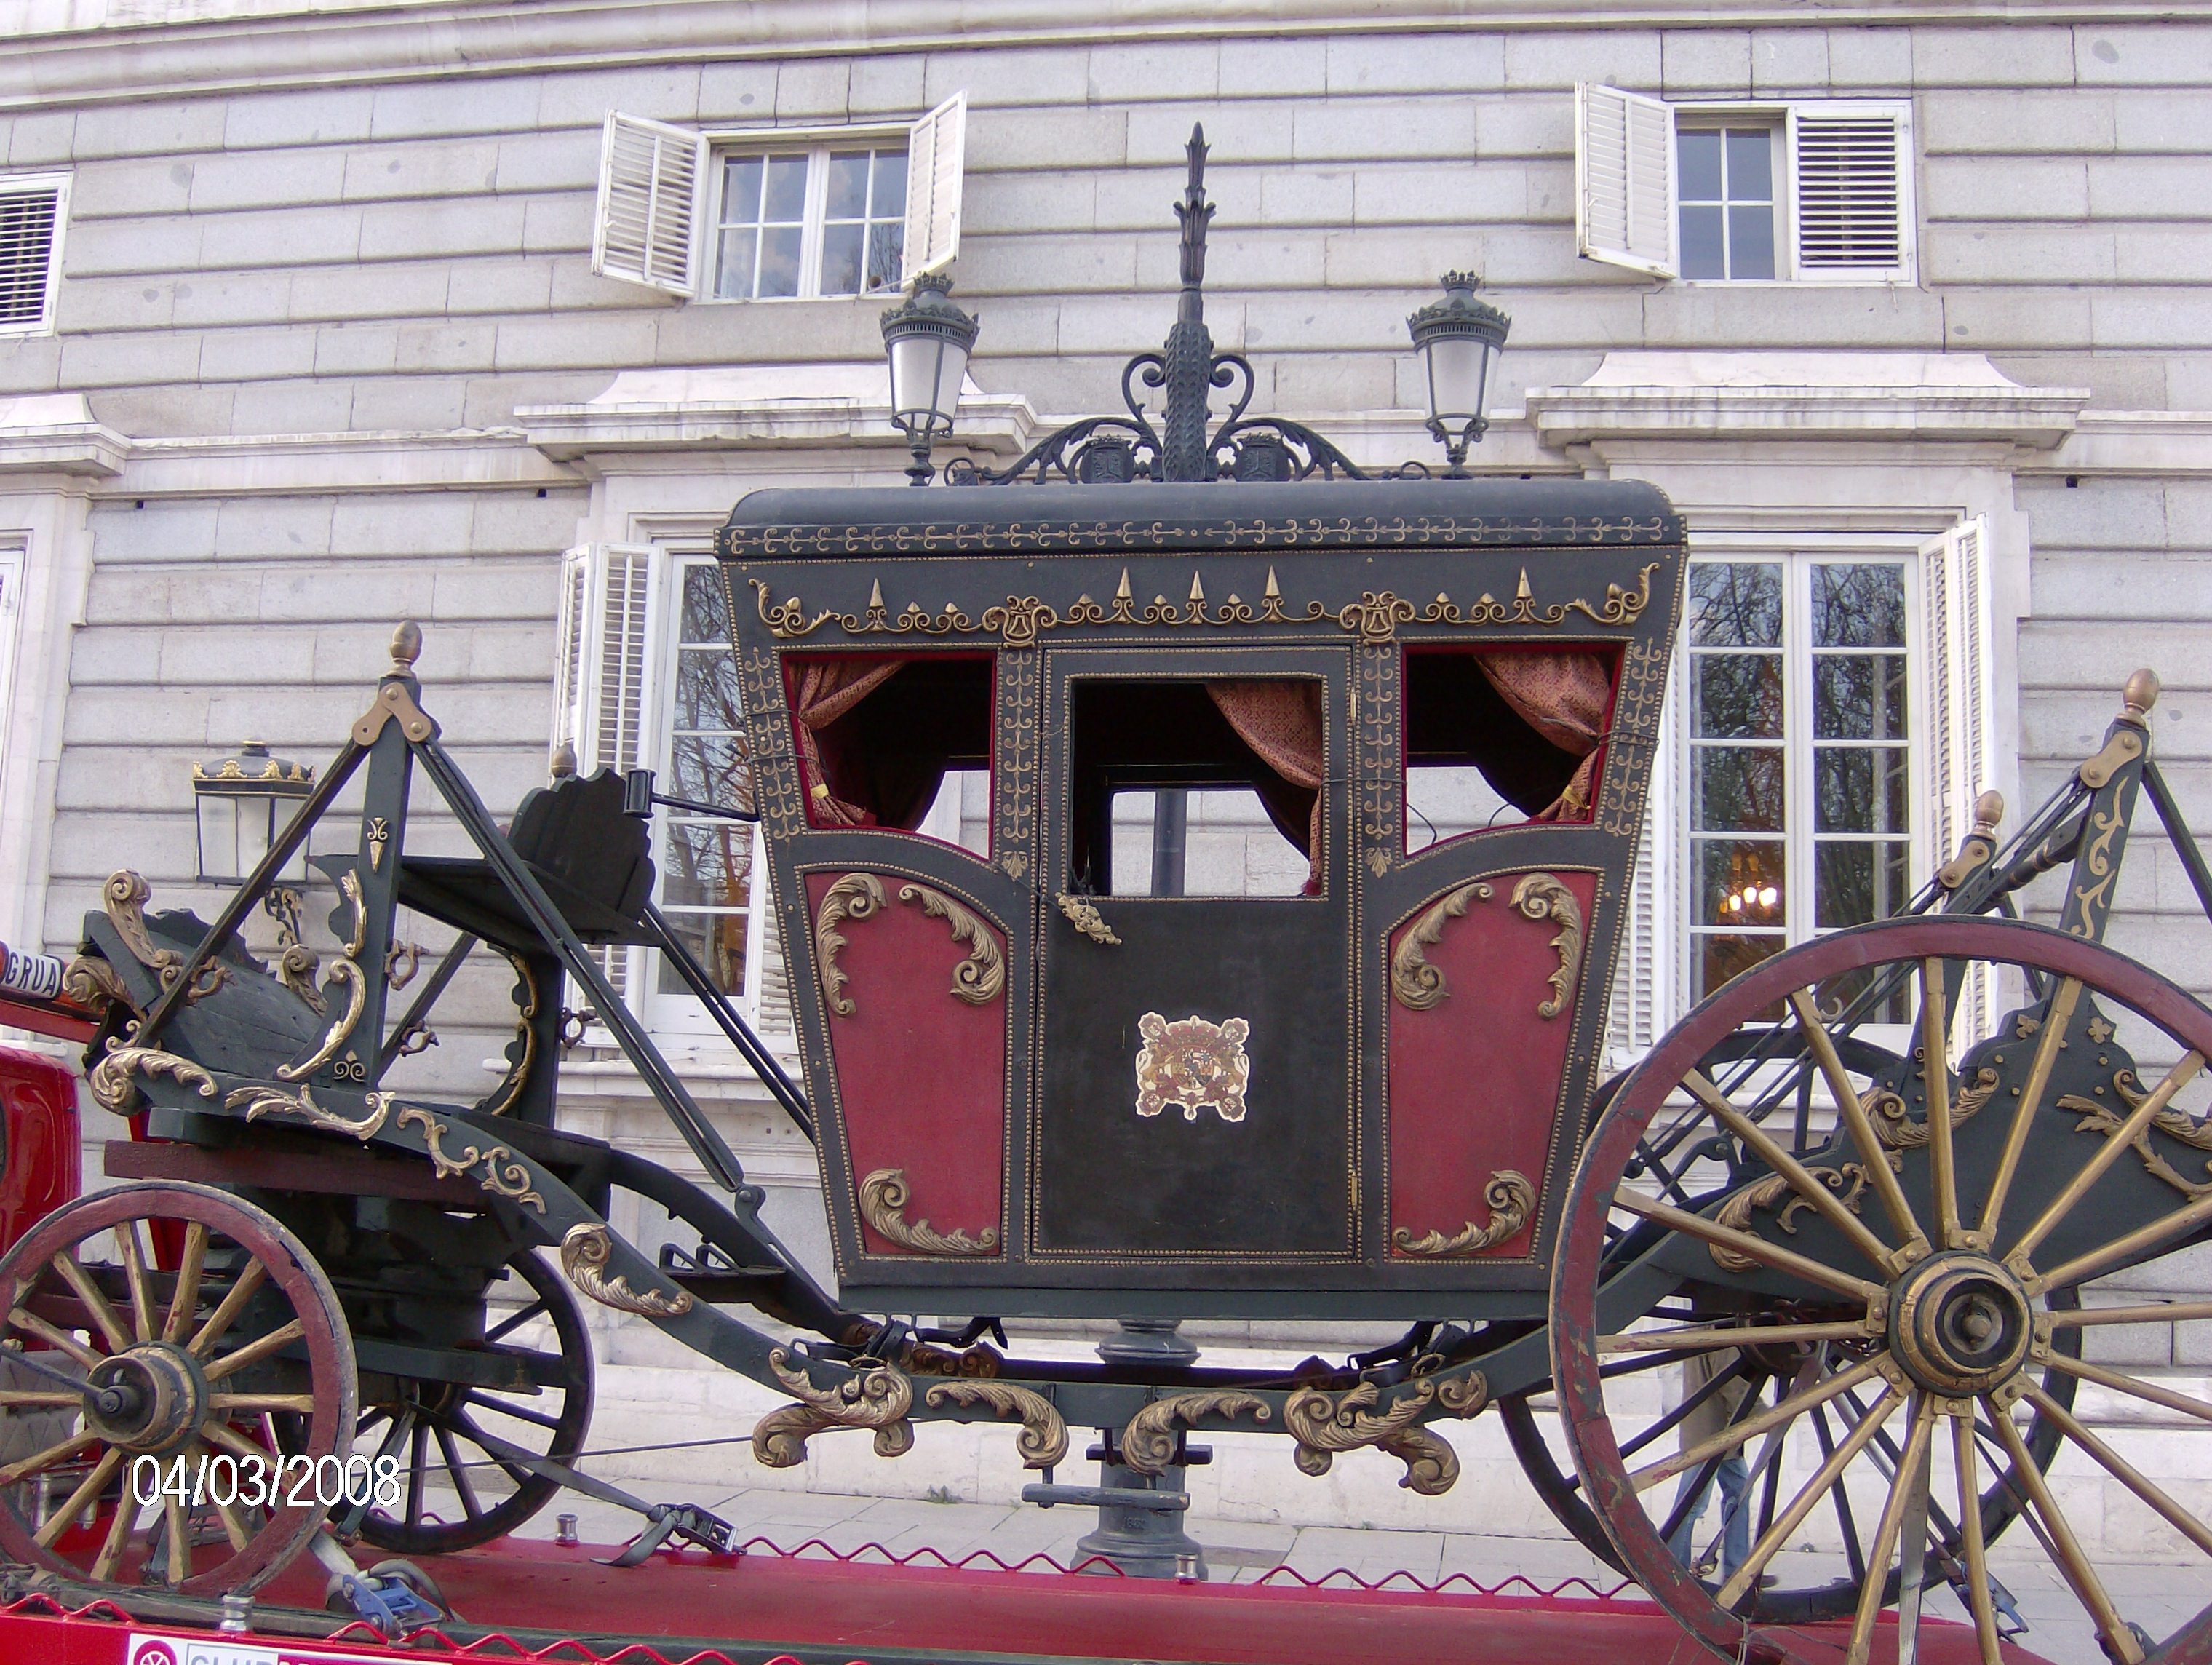 Spanish photos: Old carriage